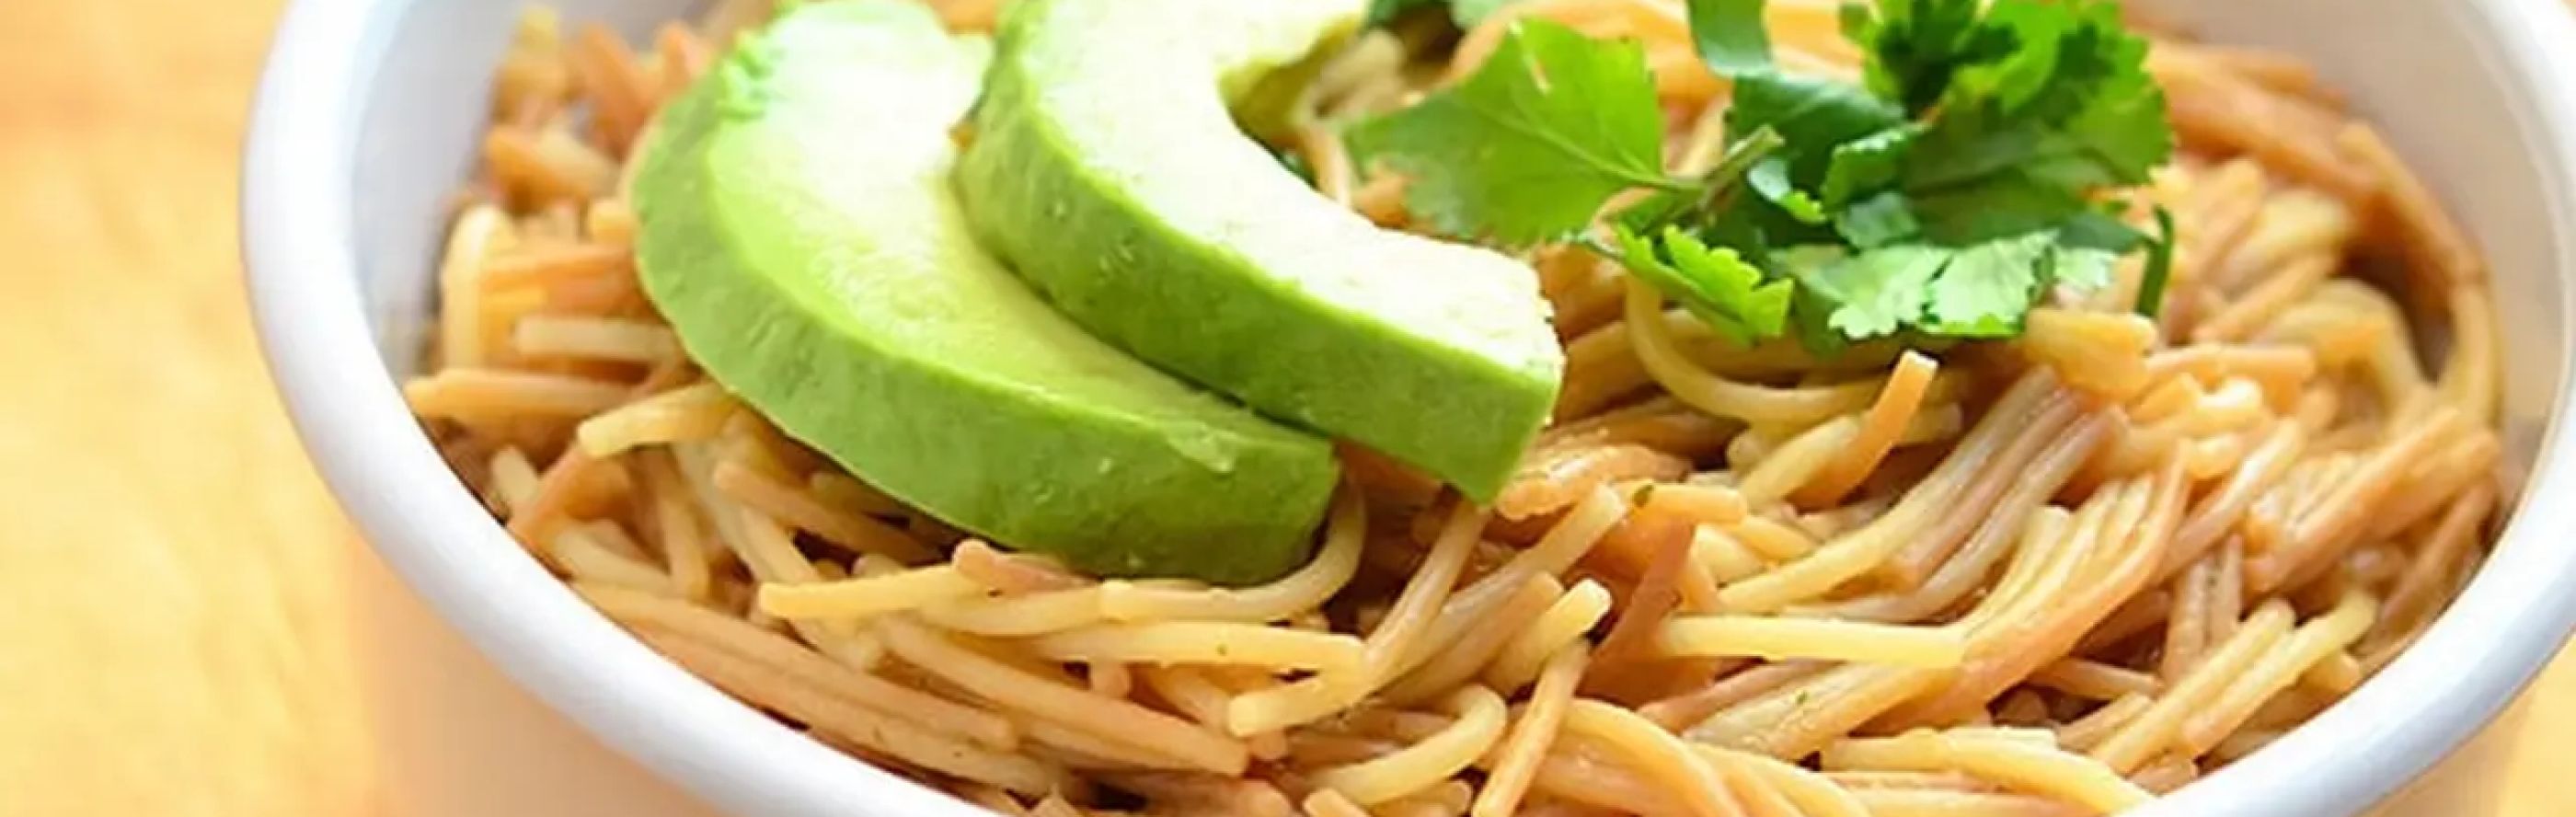 Spanish Fideo in a bowl topped with avocado slices